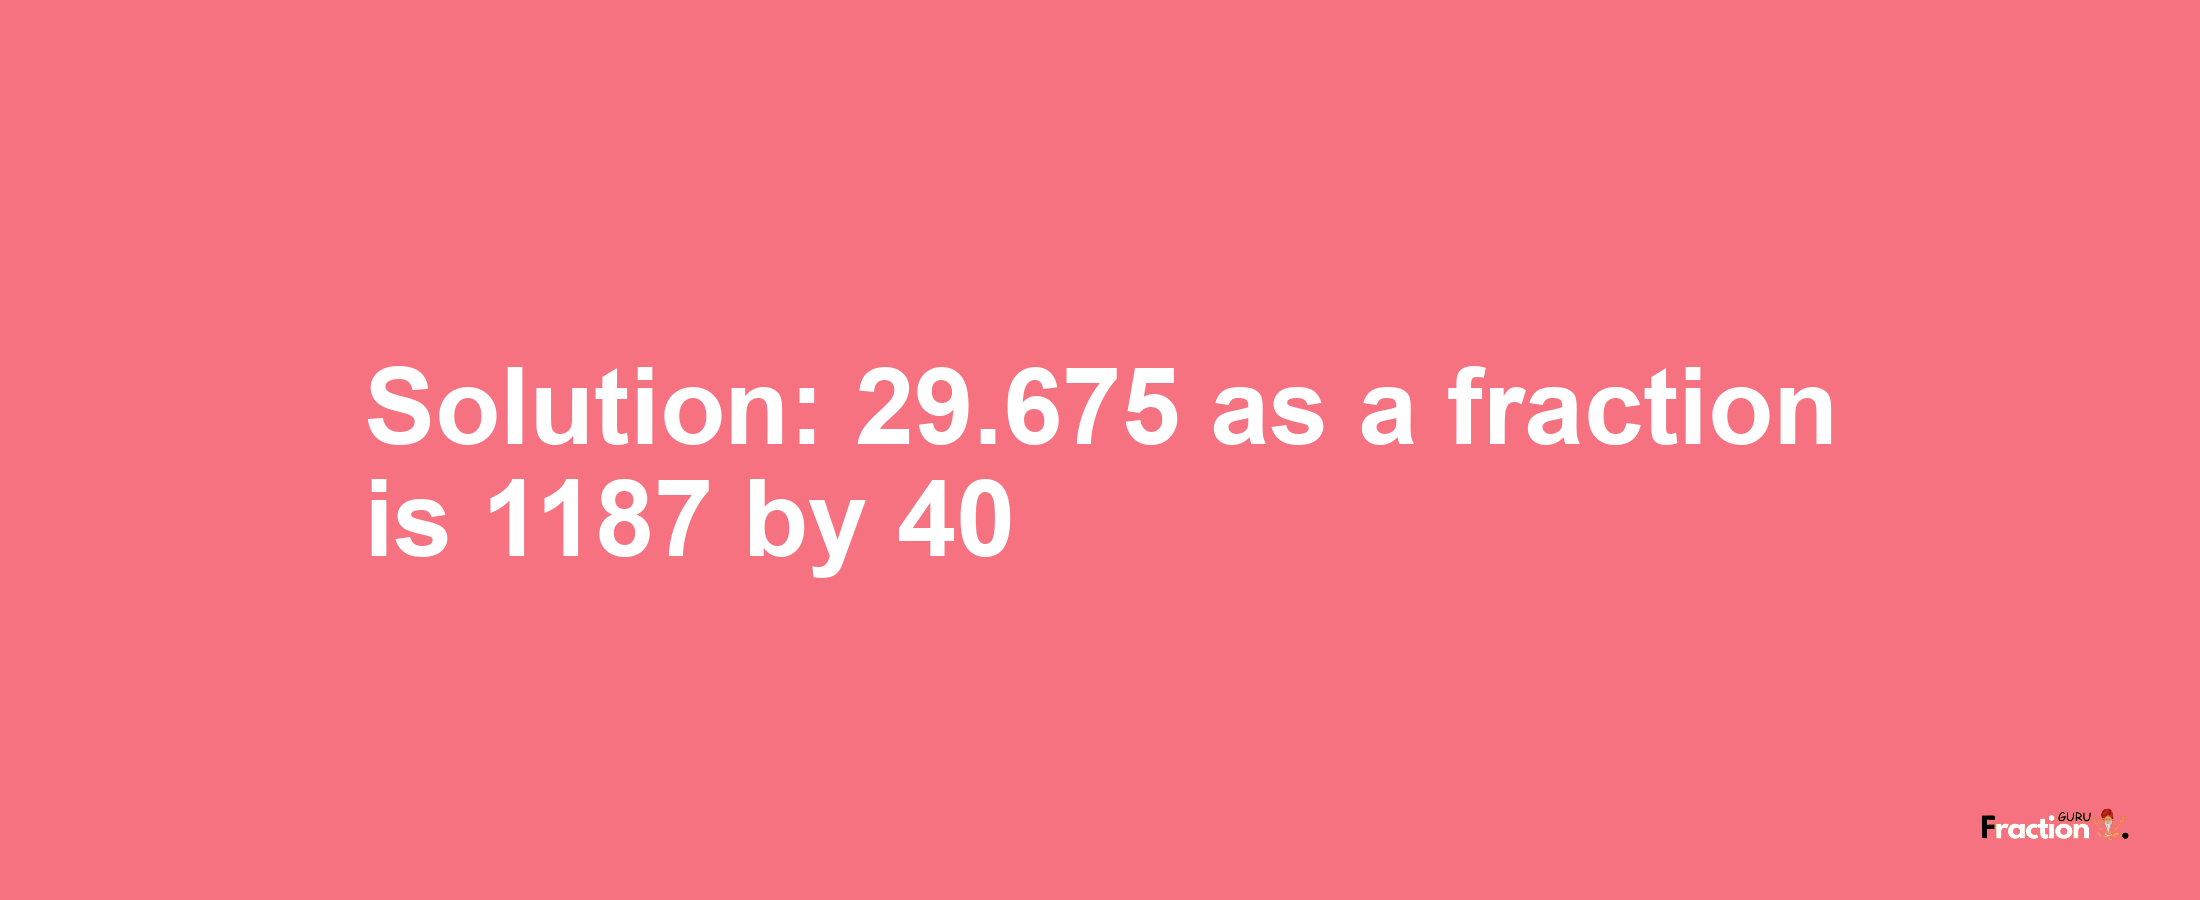 Solution:29.675 as a fraction is 1187/40